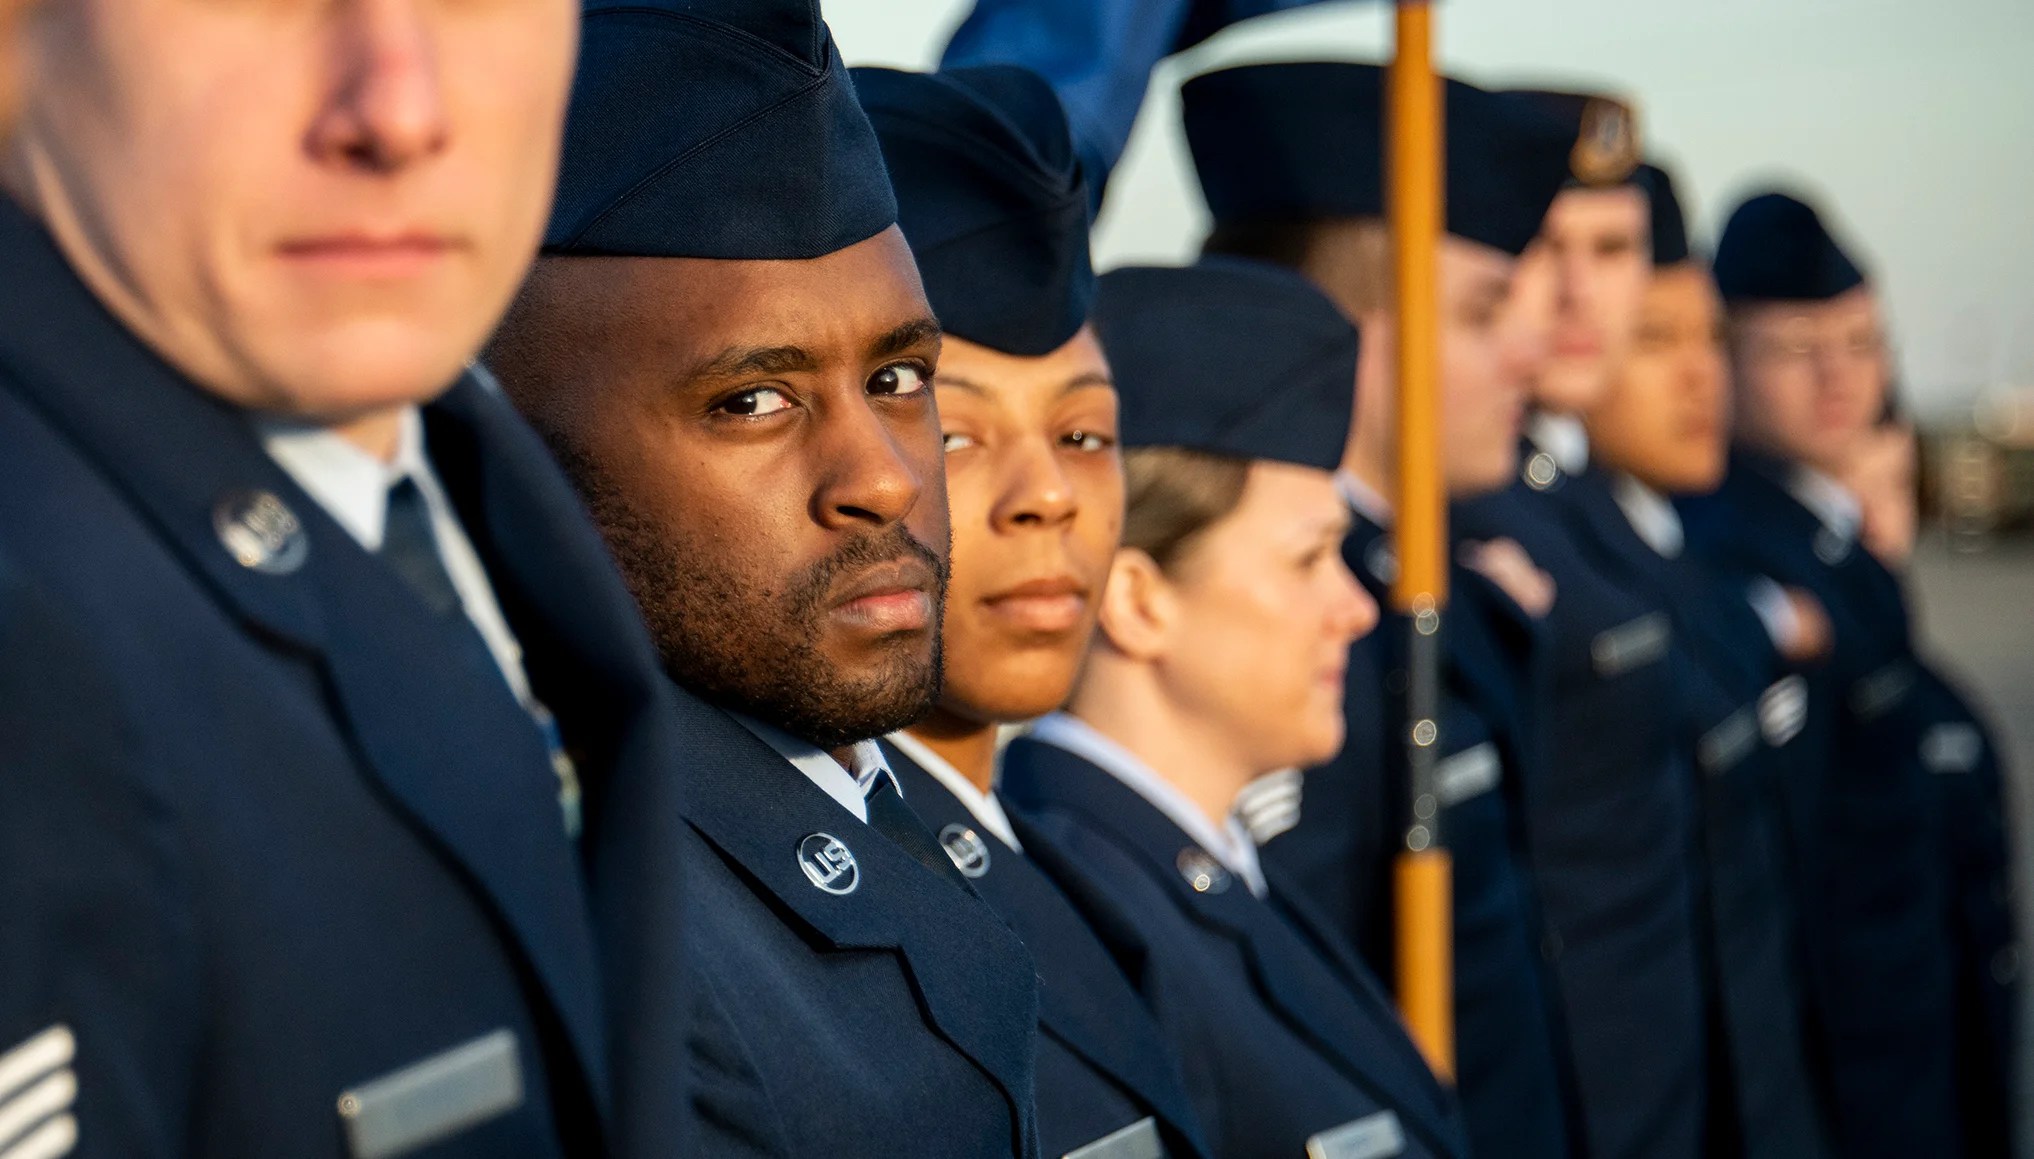 Uniform inspections for air force